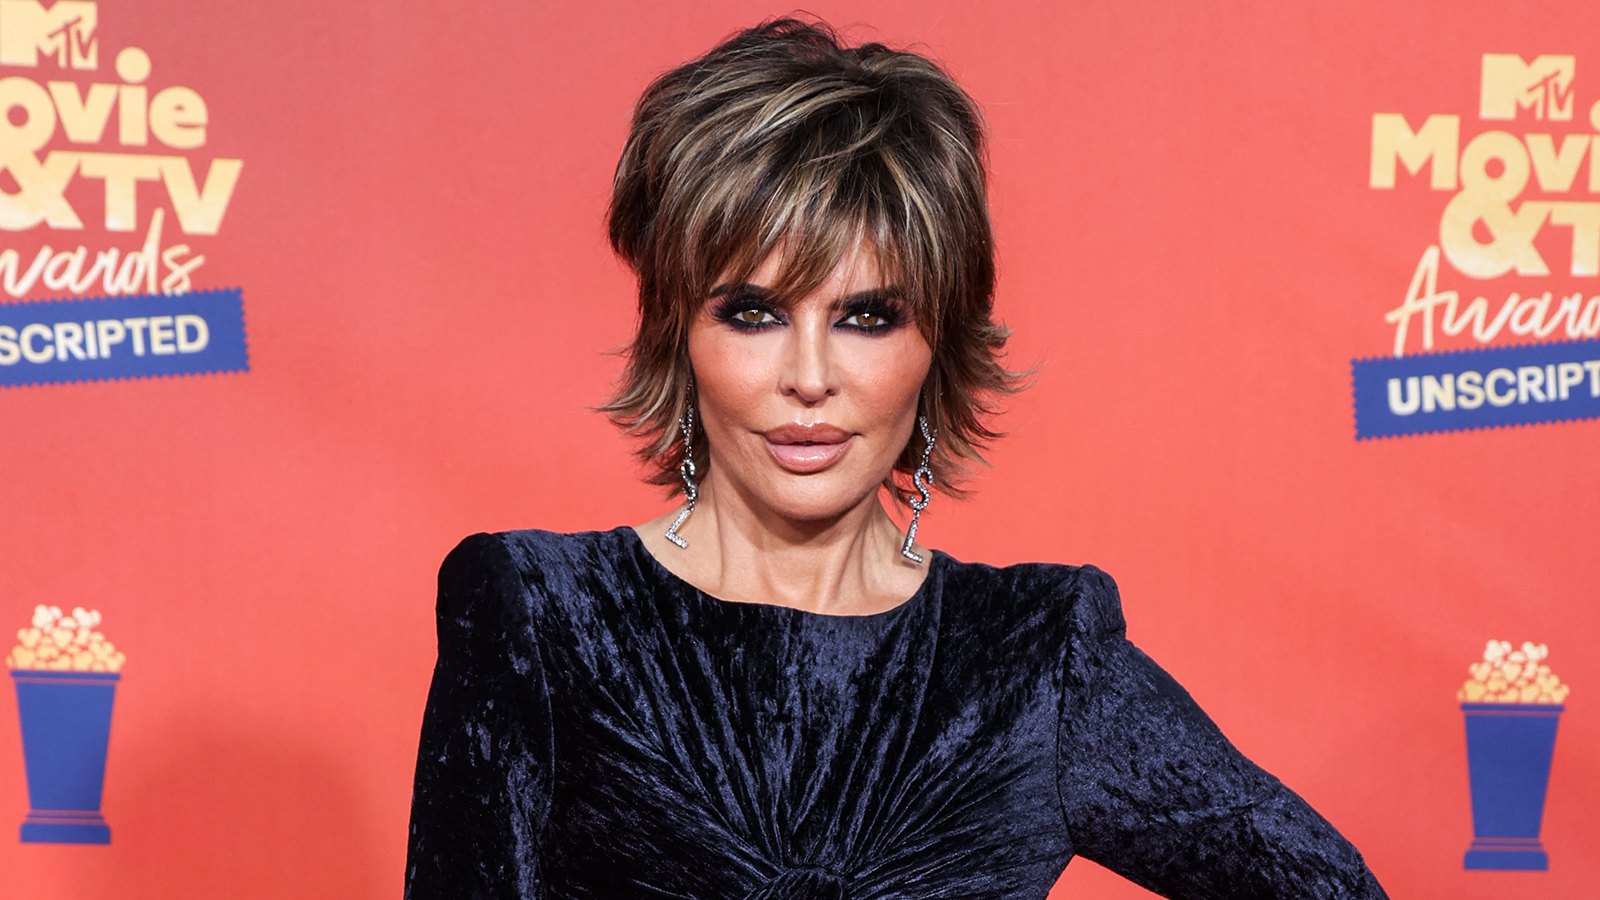 Lisa Rinna Looks Unreal as Flashes Her Best Smize in a Sexy String Bikini